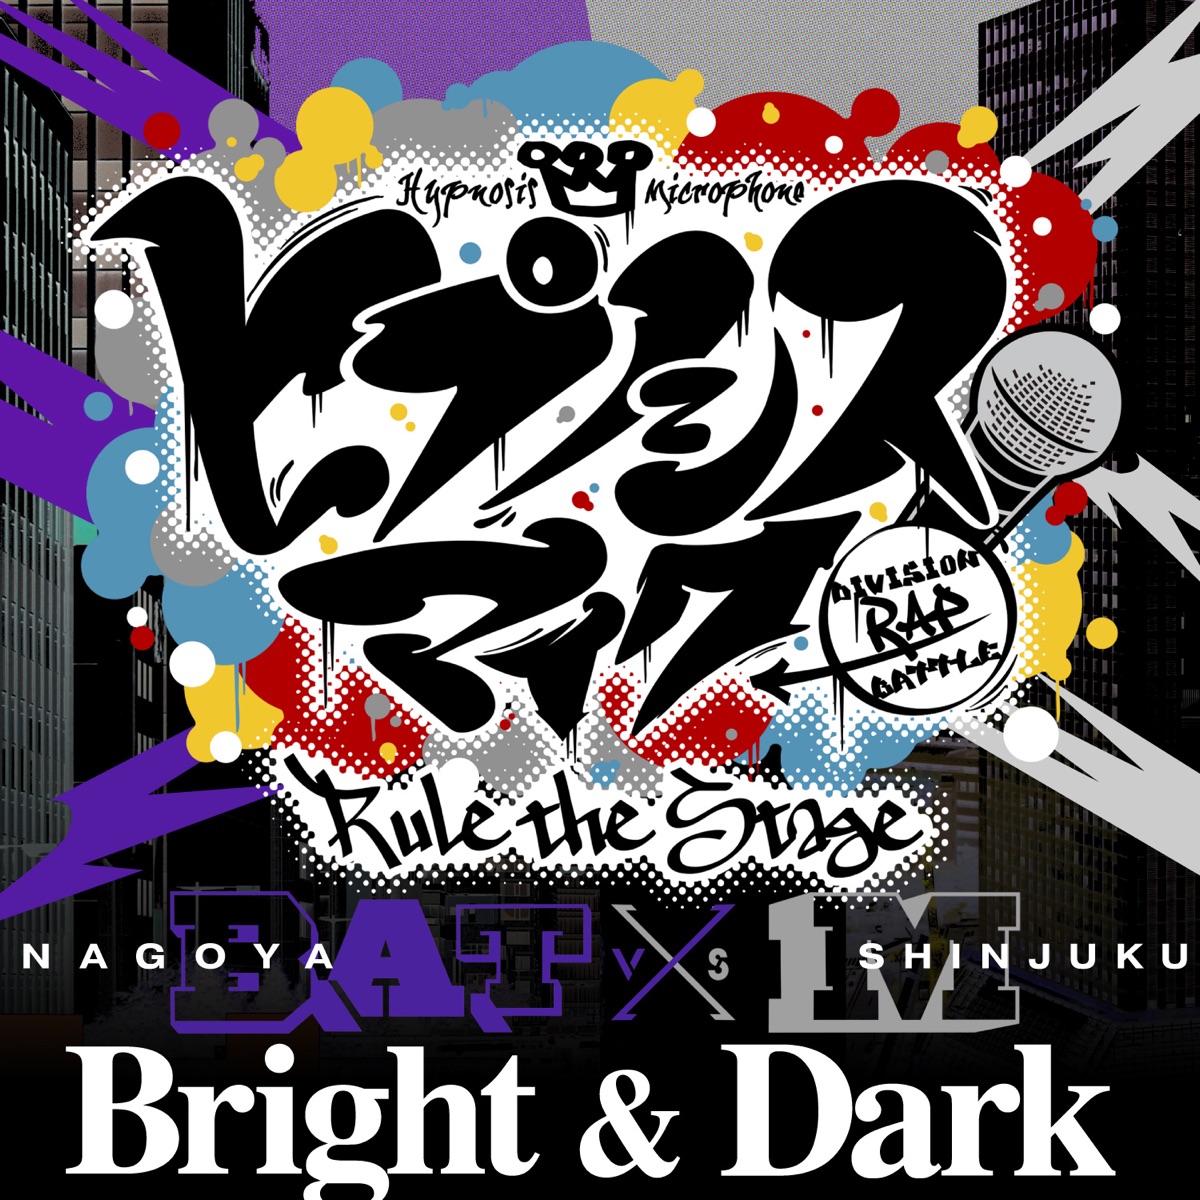 Cover art for『Hypnosis Mic -D.R.B- Rule the Stage (B.A.T vs M All Cast) - Bright & Dark』from the release『Bright & Dark